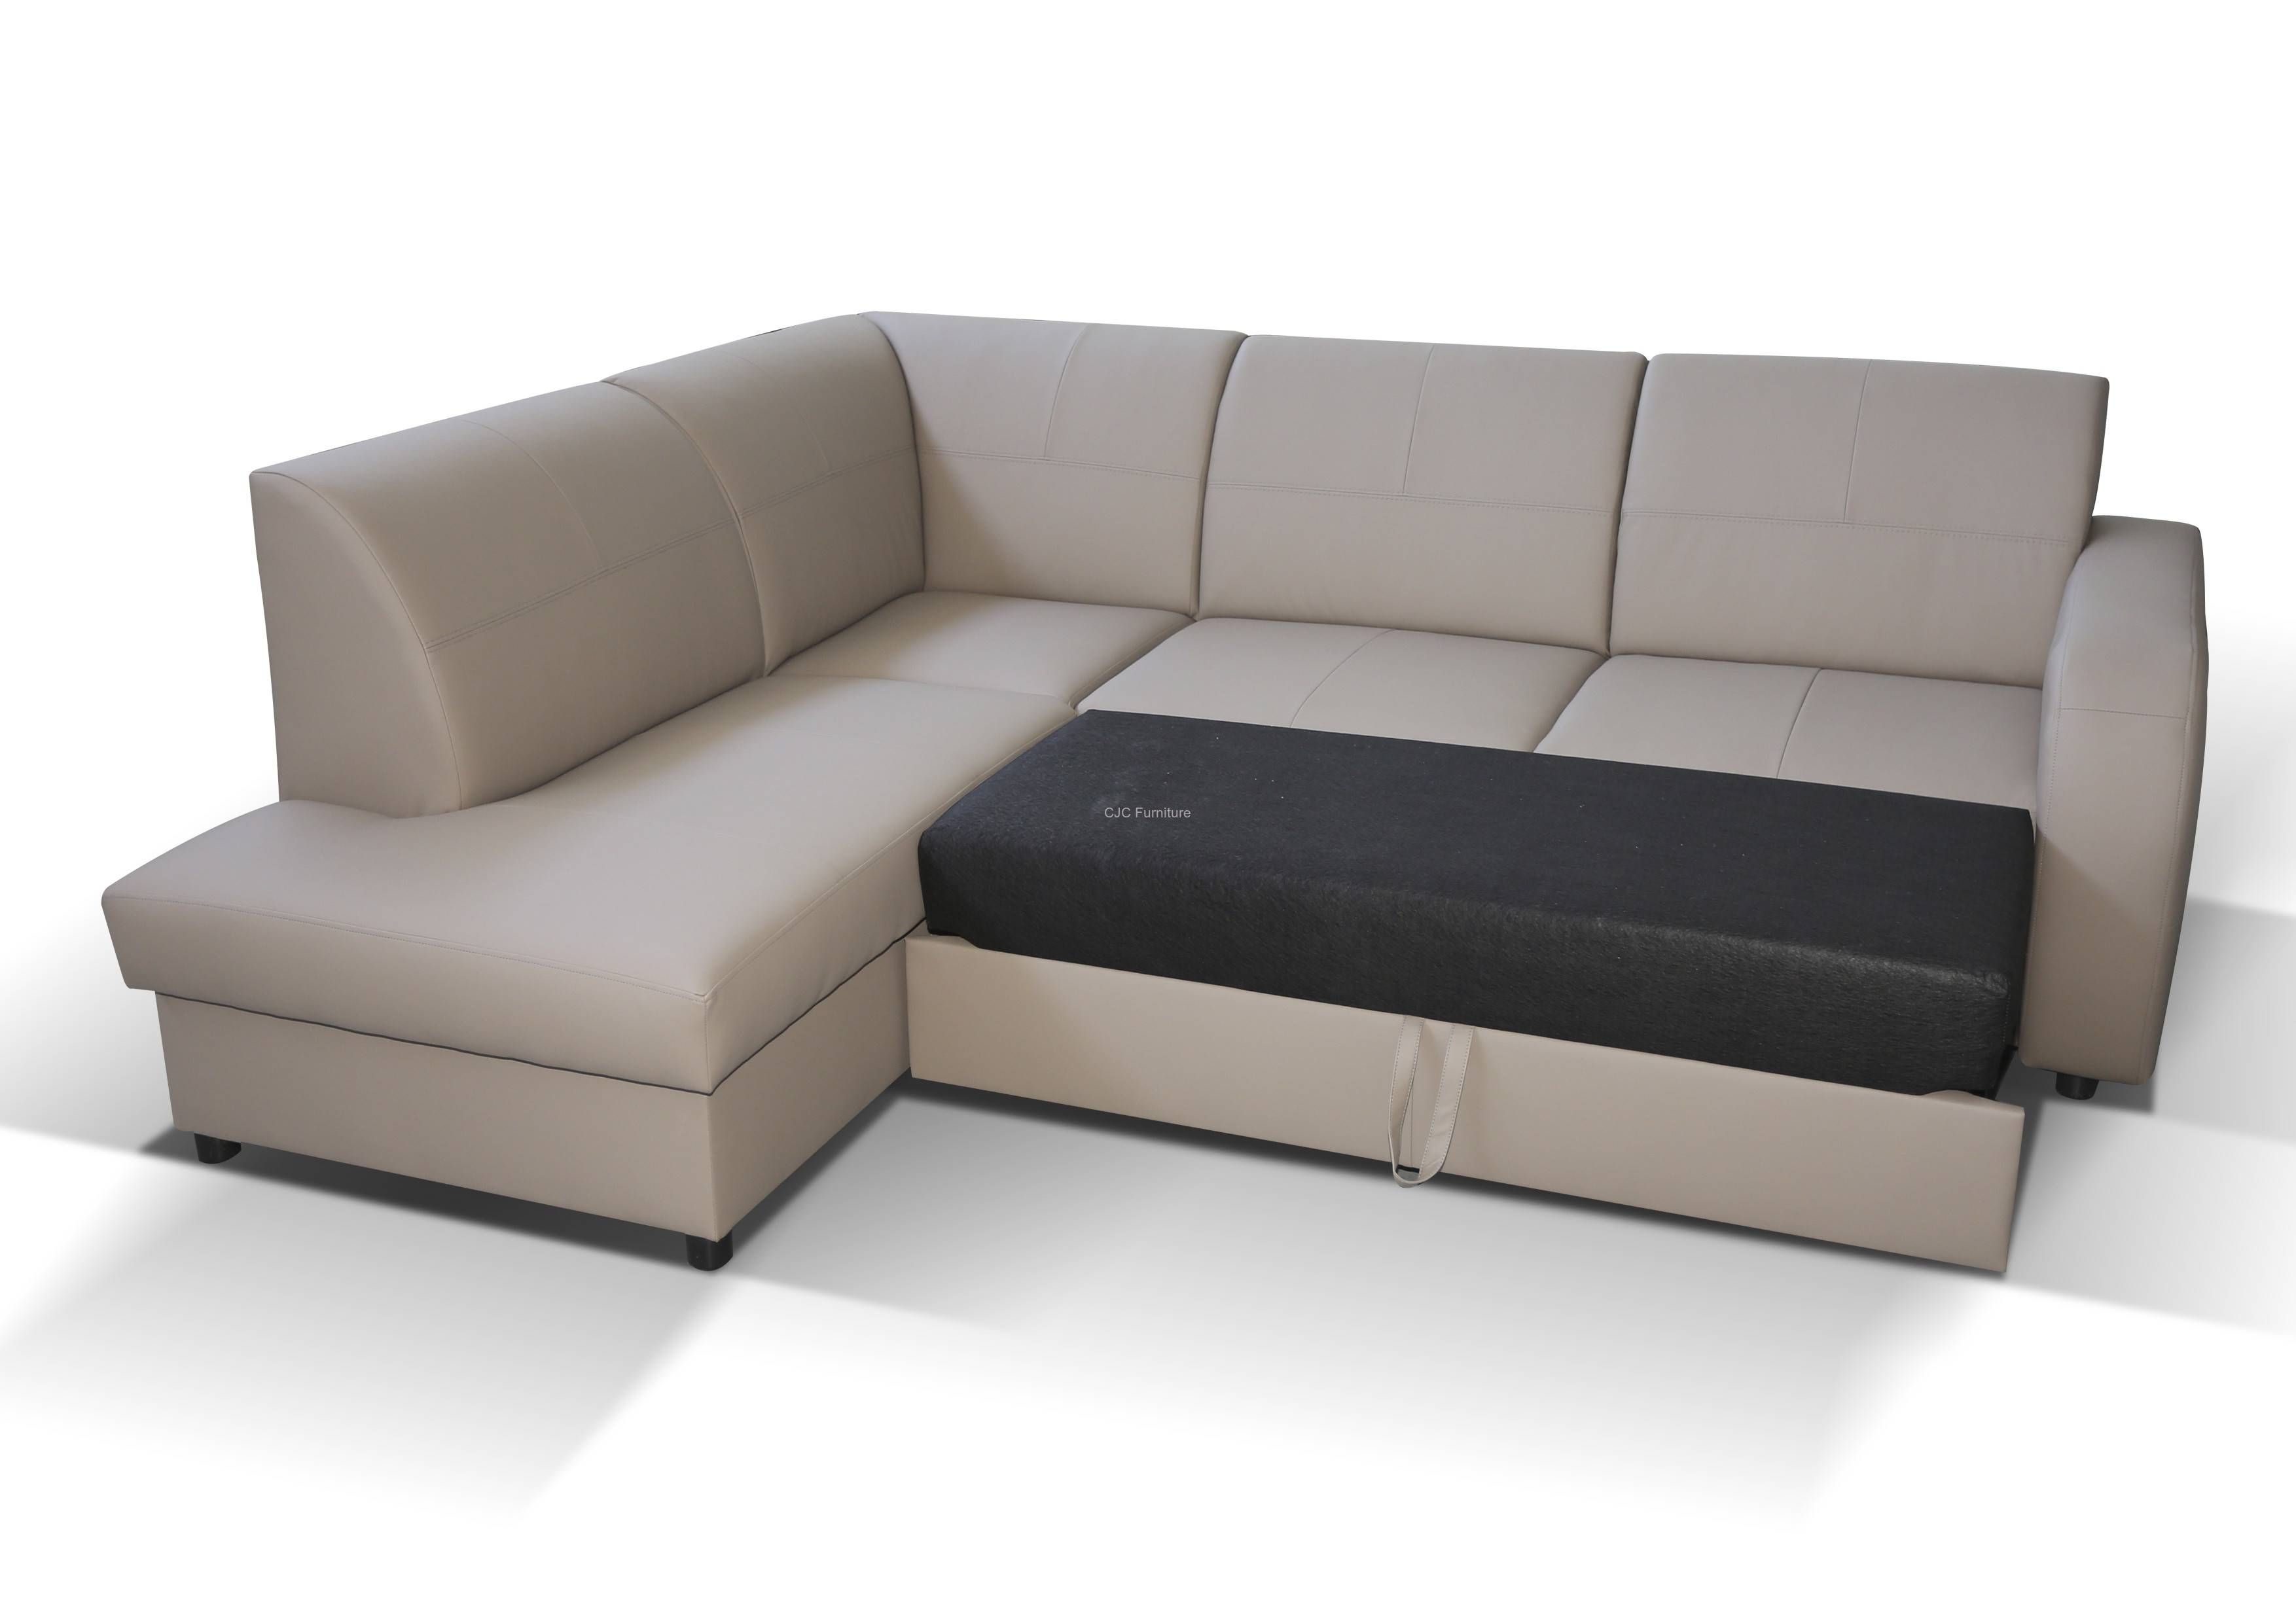 Corner Sofa Bed Style For New Home Design | Eva Furniture With Regard To Leather Corner Sofa Bed (Photo 12 of 30)